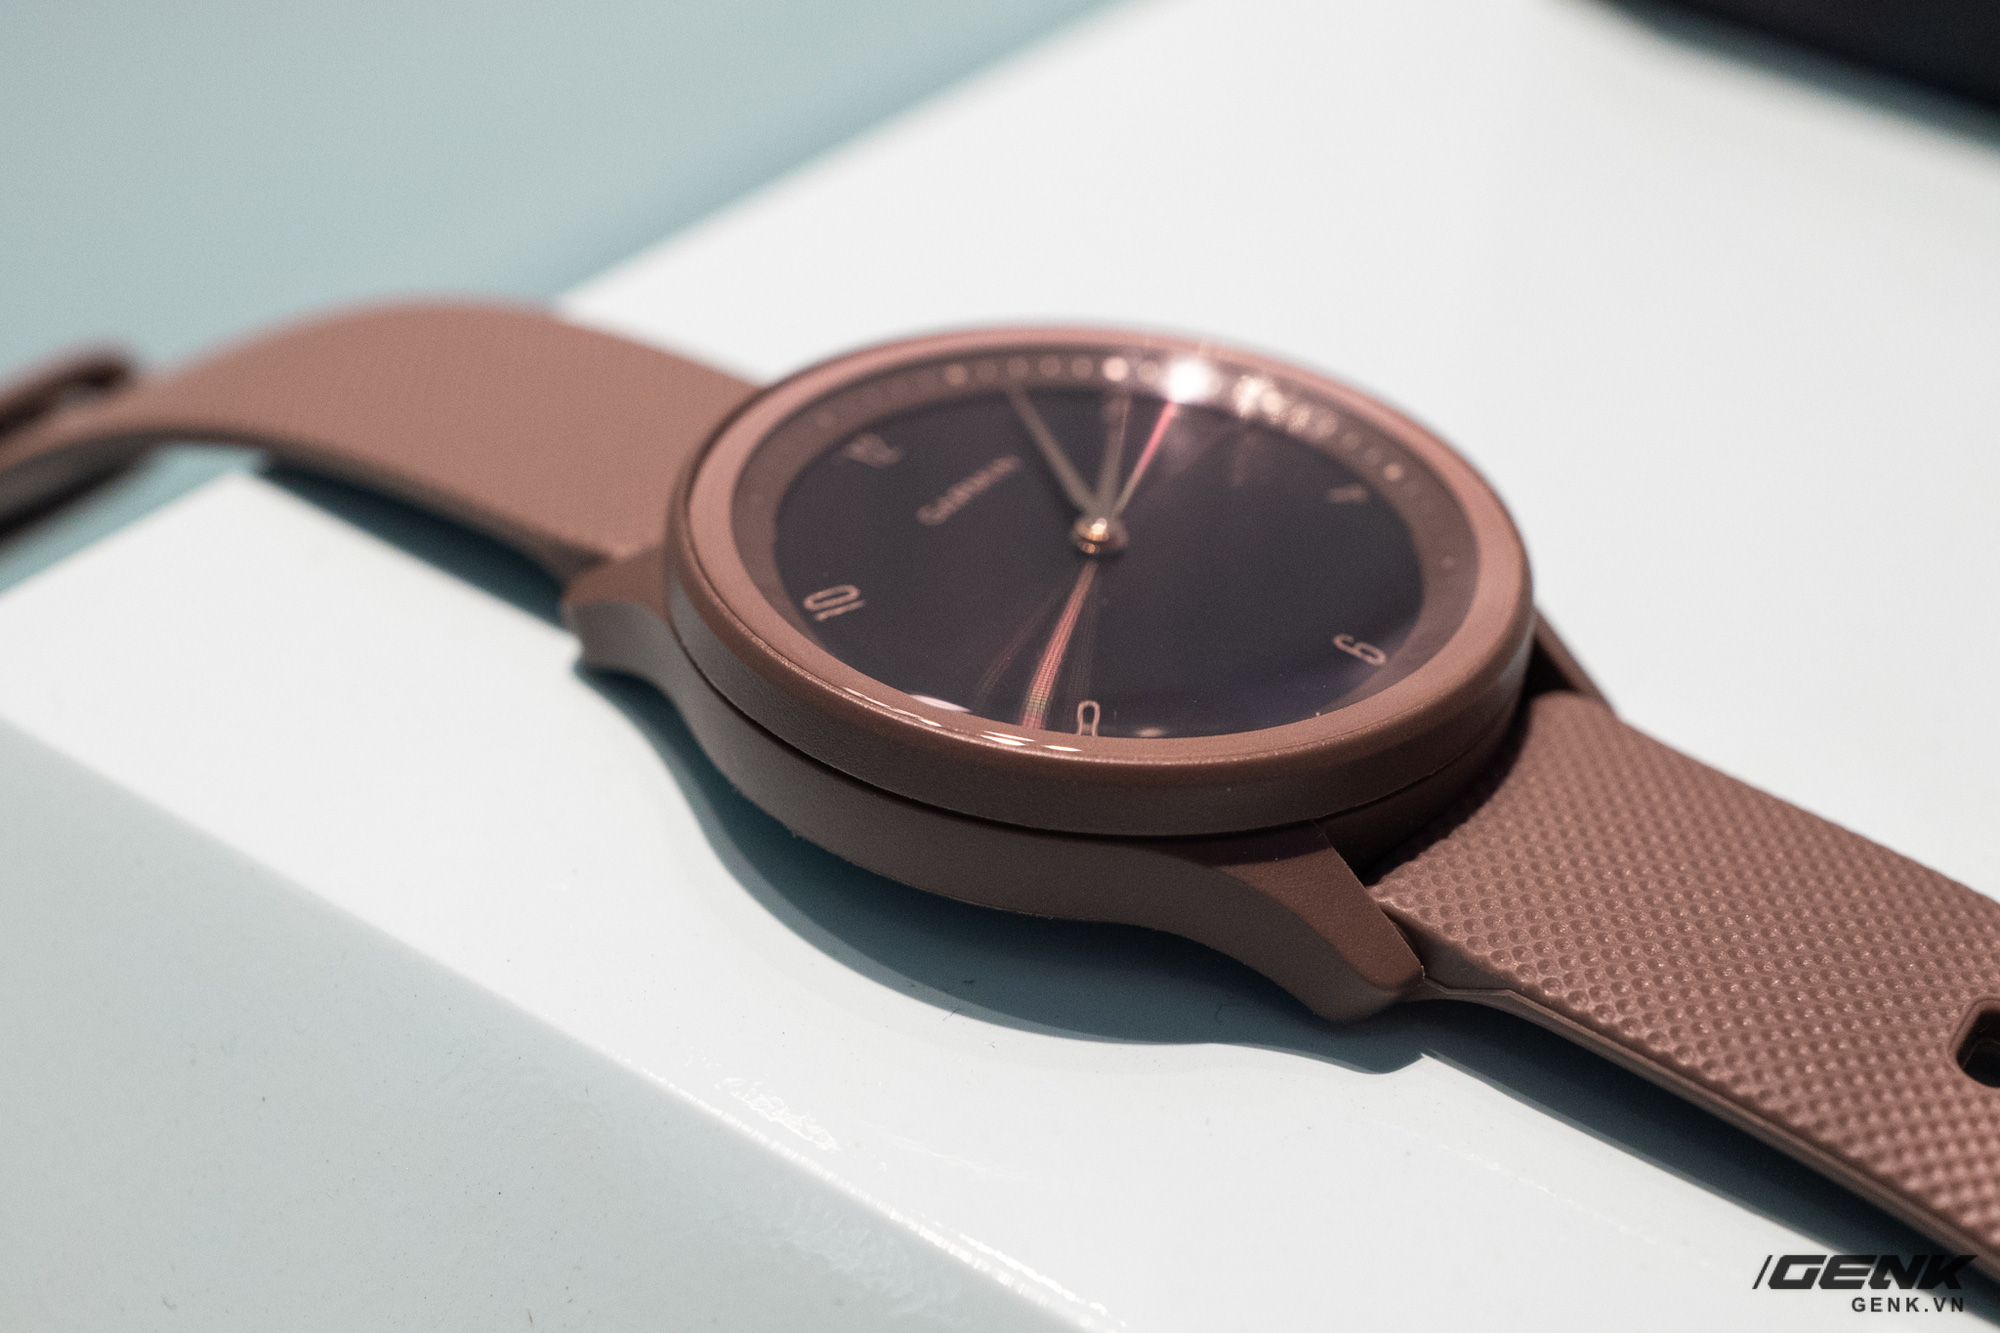 Garmin launched the watch Hybrid vivomove Sport: classic analog combined with modern touch, priced from 4.5 million VND - Photo 12.